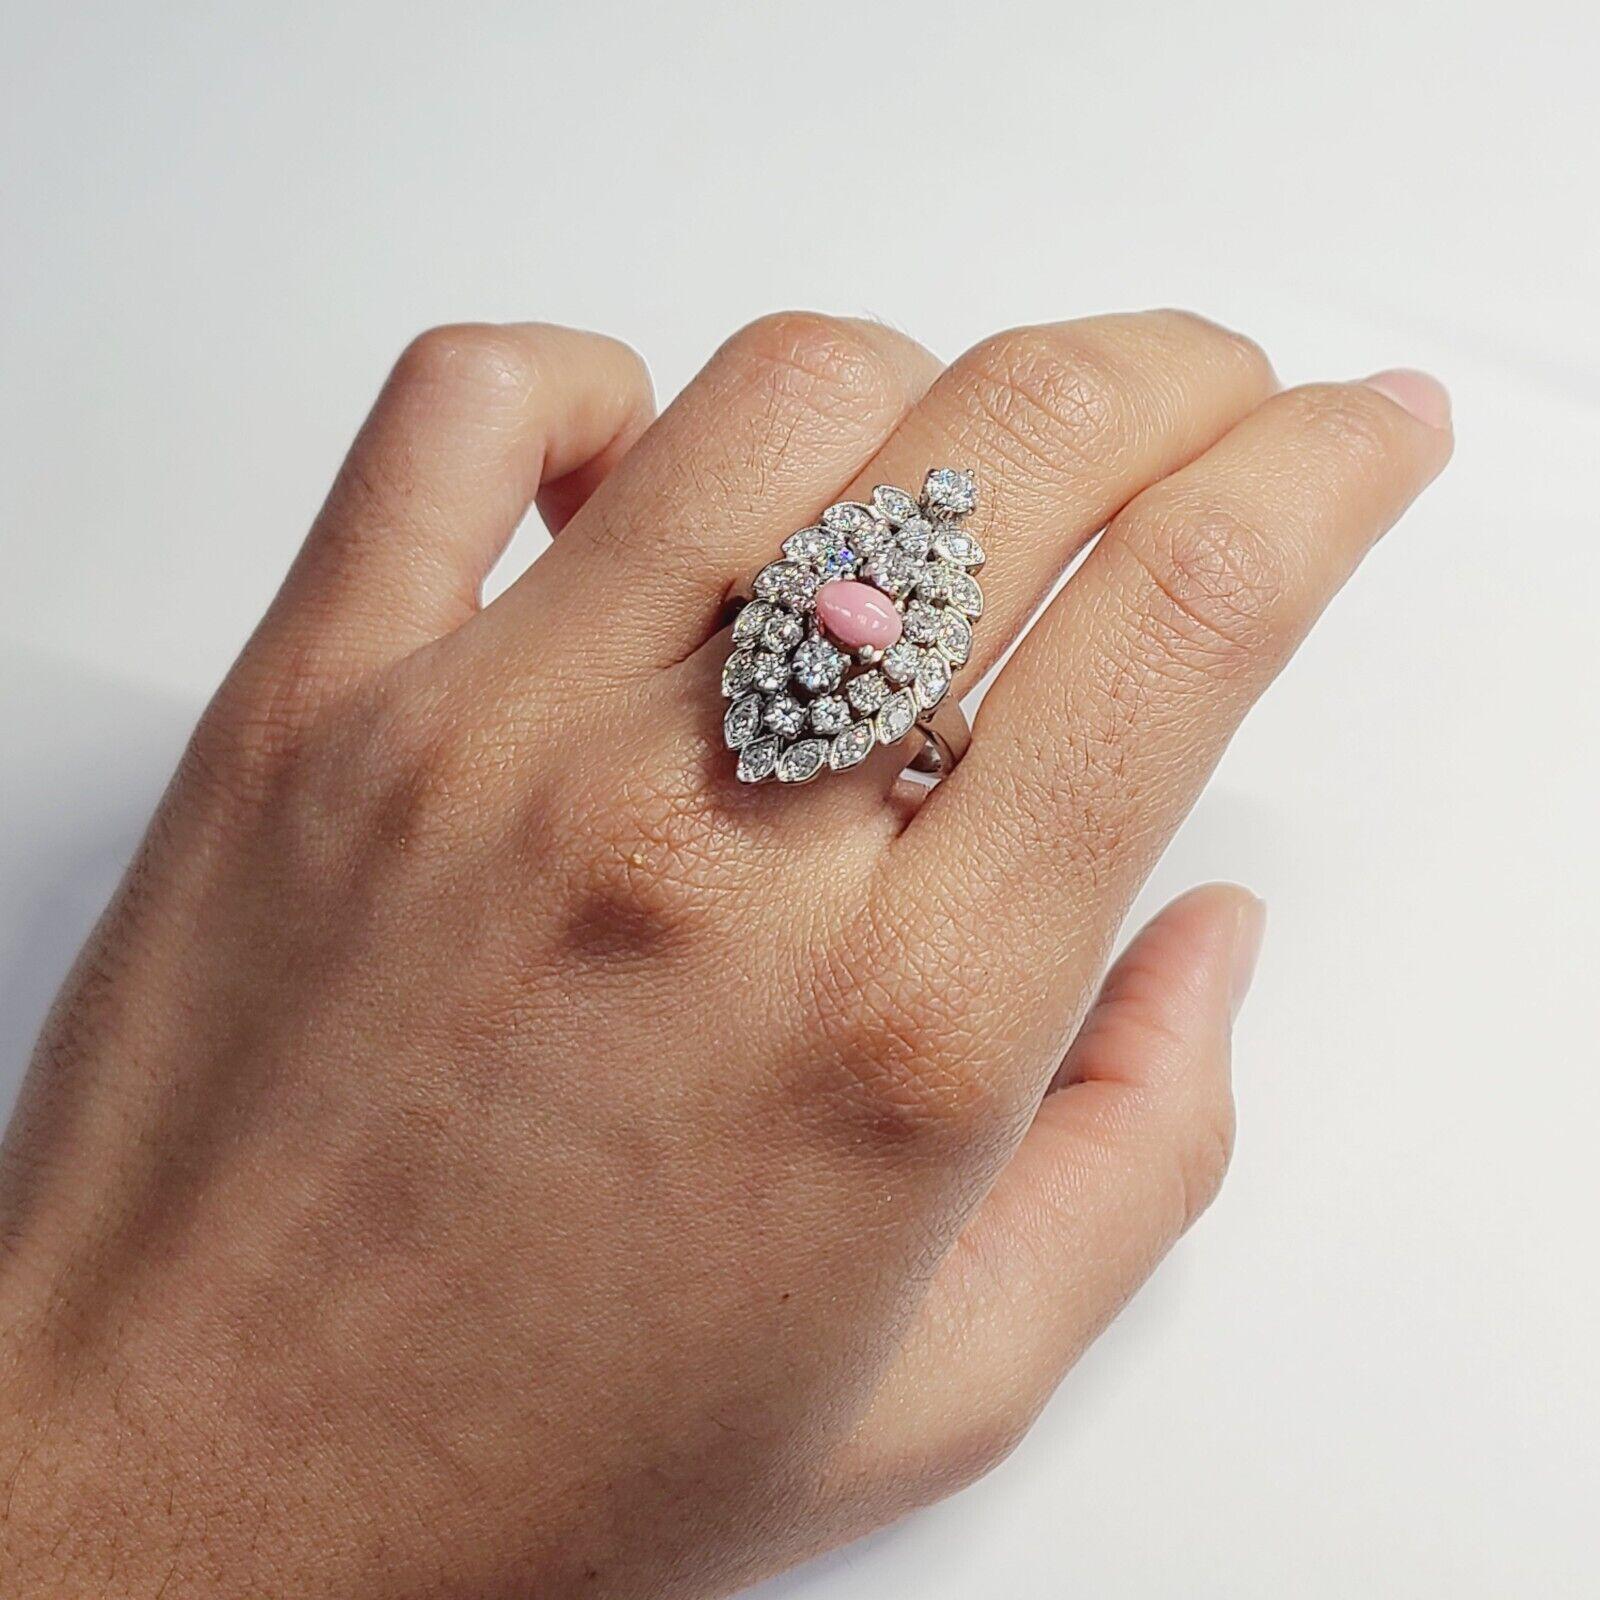 Presenting a:

14K White Gold 1.9ctw Old mine Diamond & Salmon Pink Conch Pearl Ring Size 8

Natural and earth mined Diamond pave and prong set in navette style with a natural pink conch pearl.

The ring measures 29mm wide, 12mm rise and 2.5mm shank